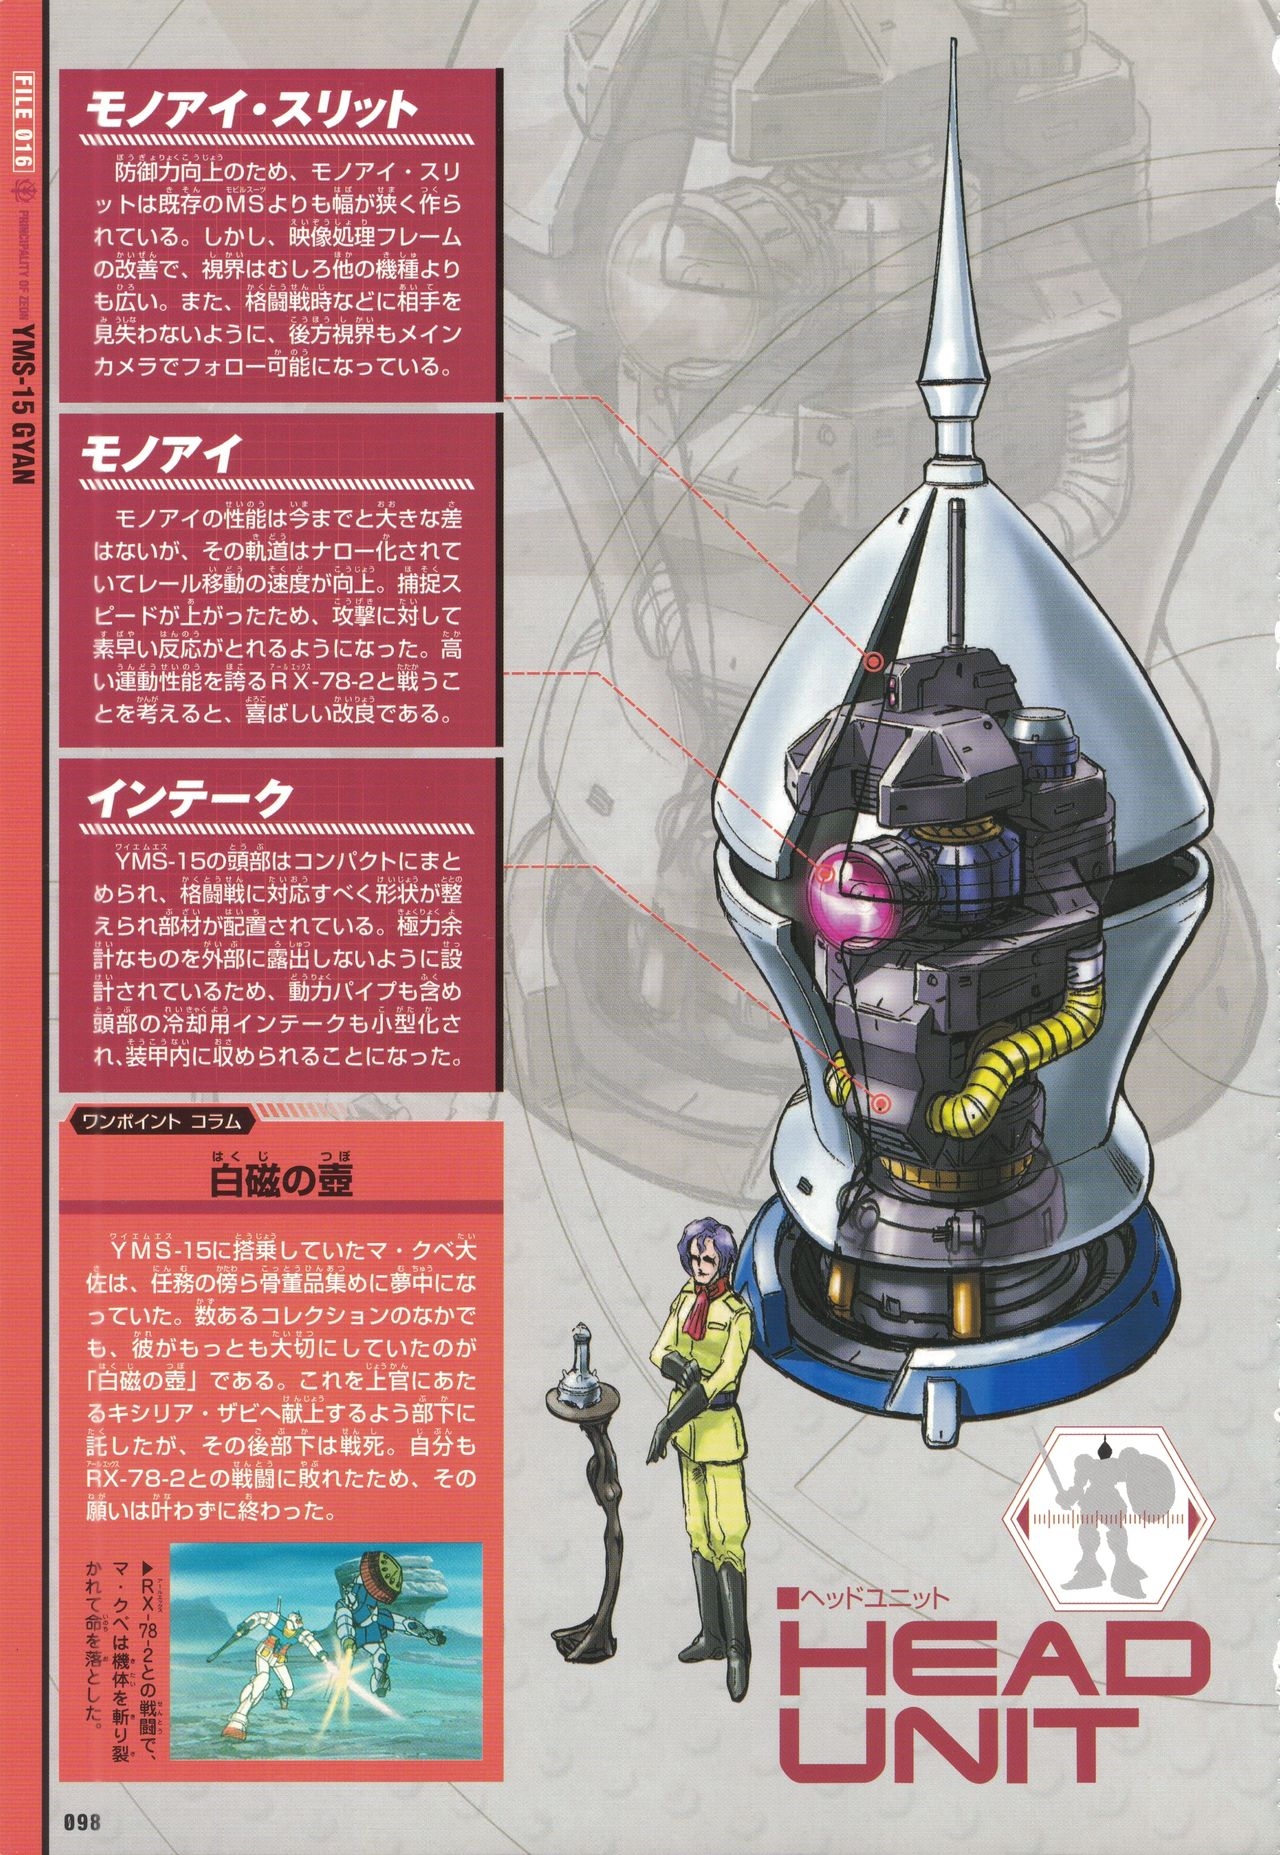 Mobile Suit Gundam - New Cross-Section Book - One Year War Edition 102